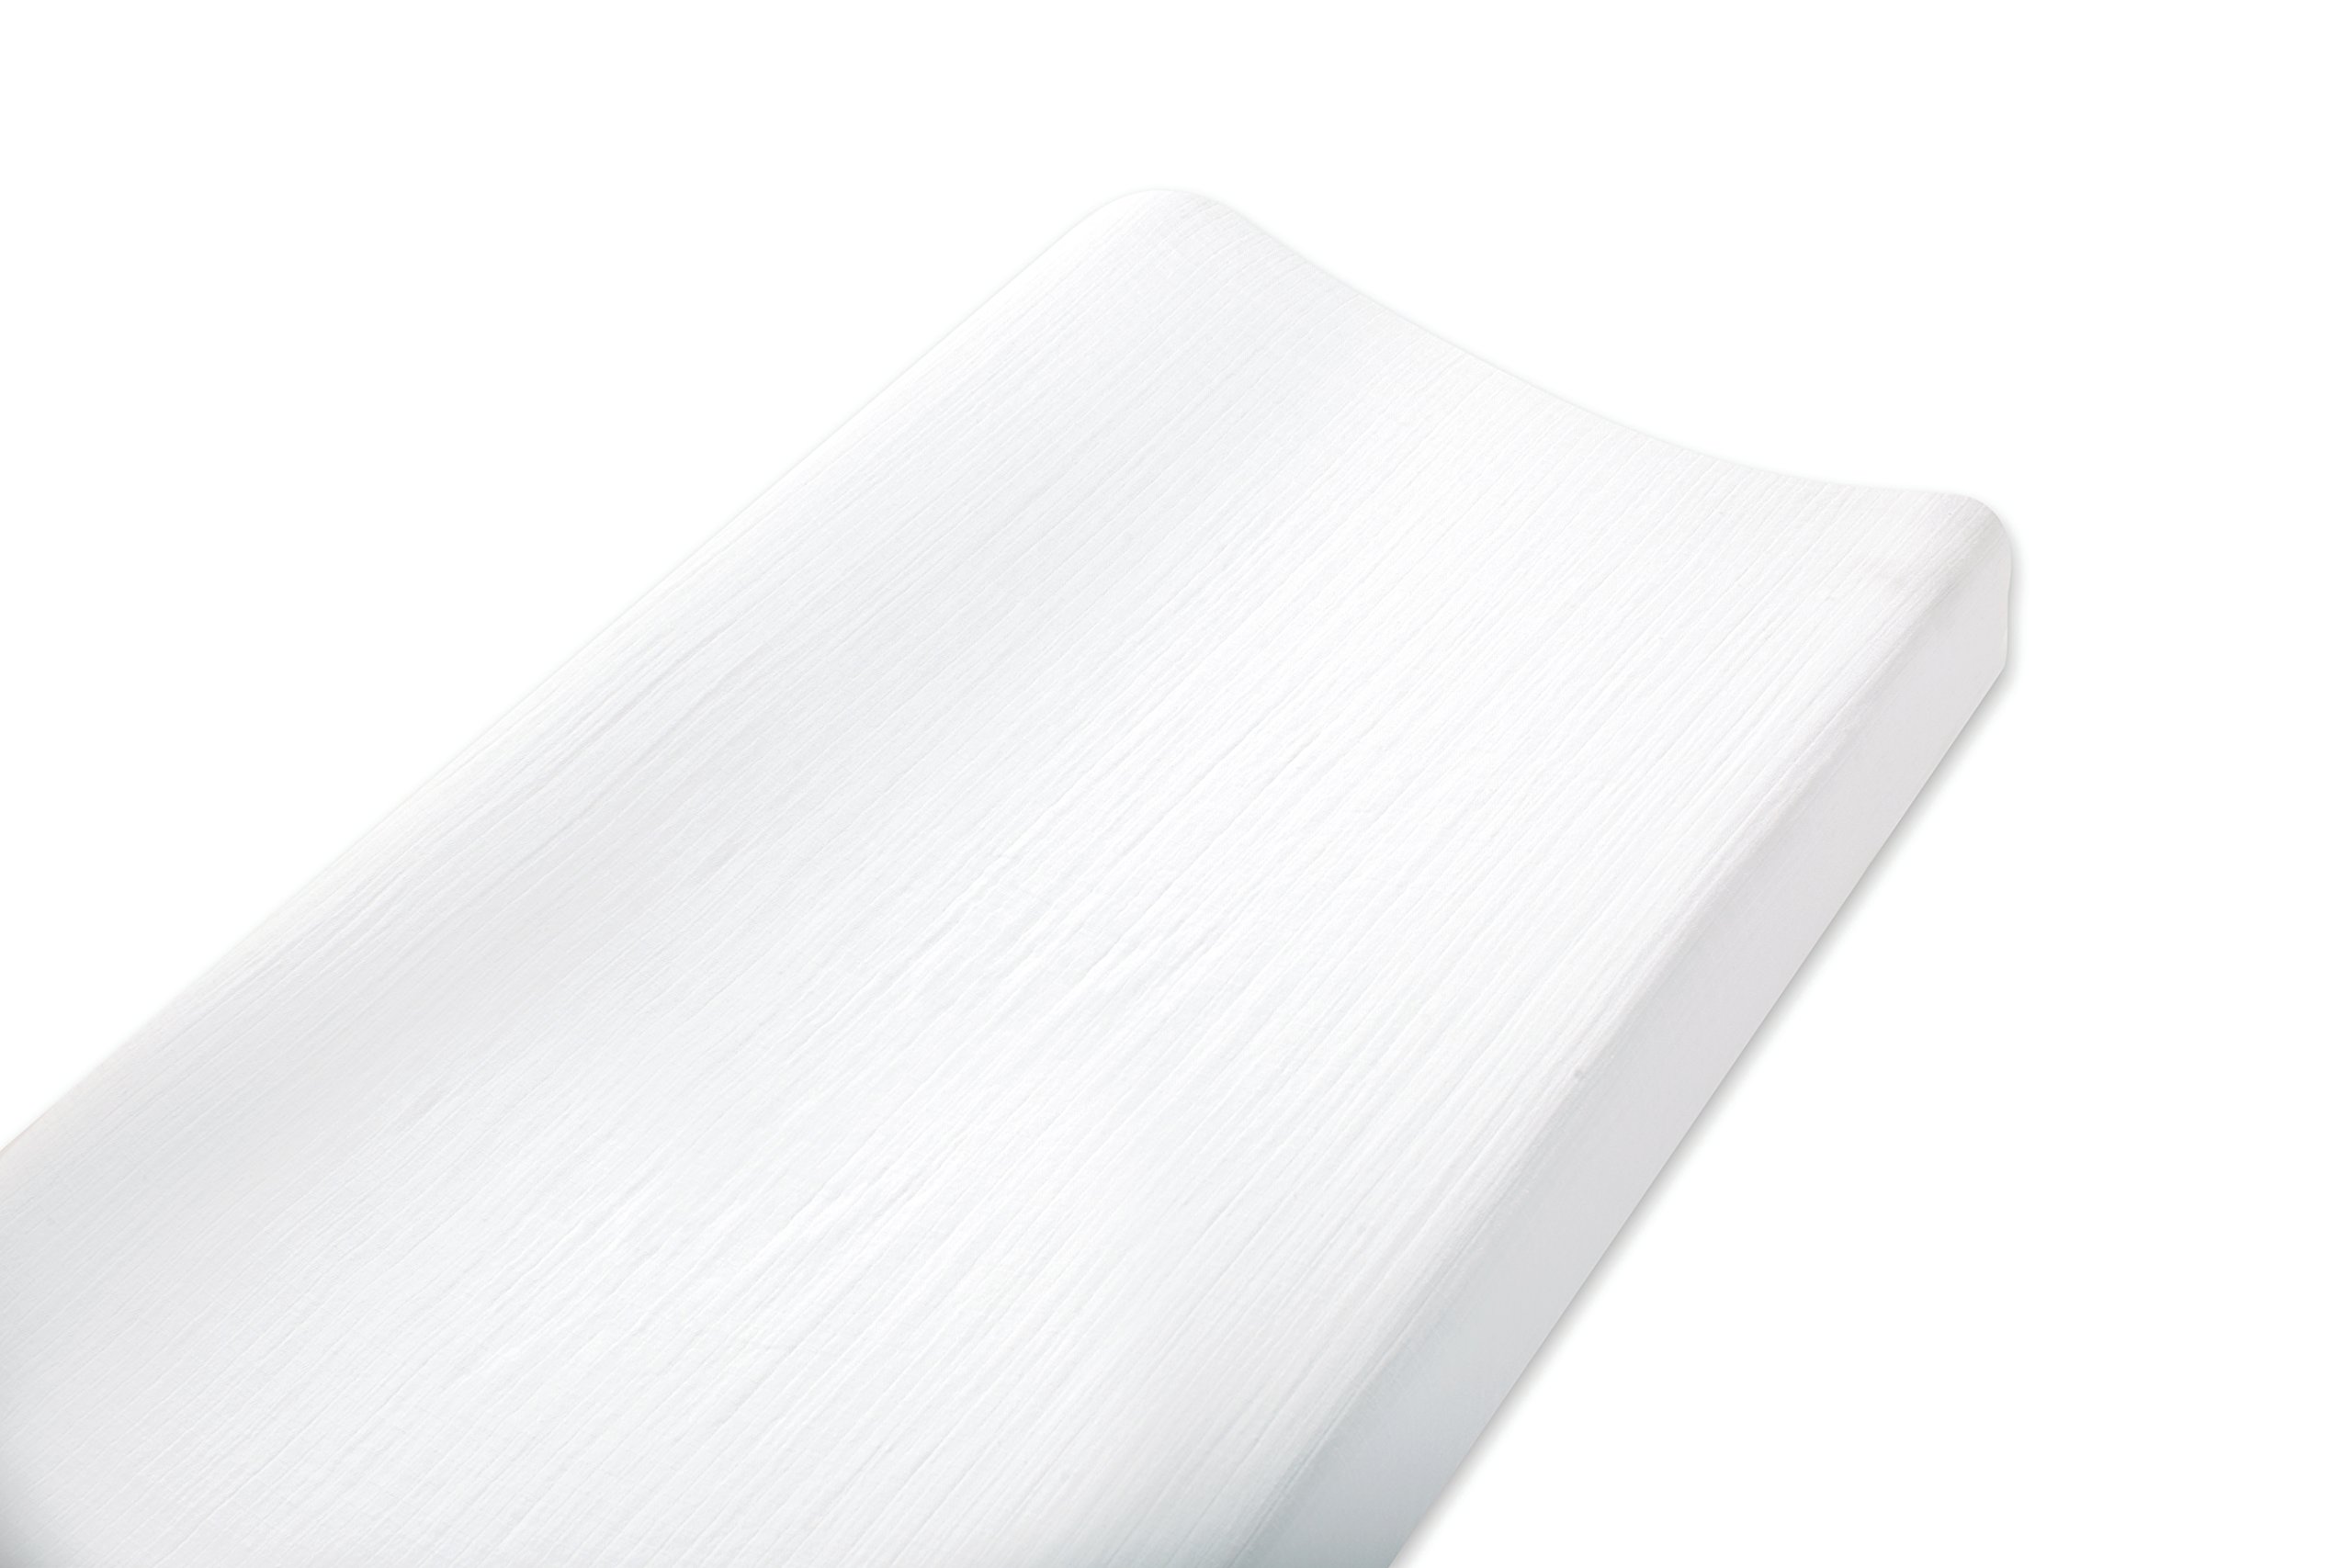 aden + anais Essentials Changing Pad Cover, 100% Cotton Muslin, Super Soft, Breathable, Tailored Snug Fit, Single, Solid White